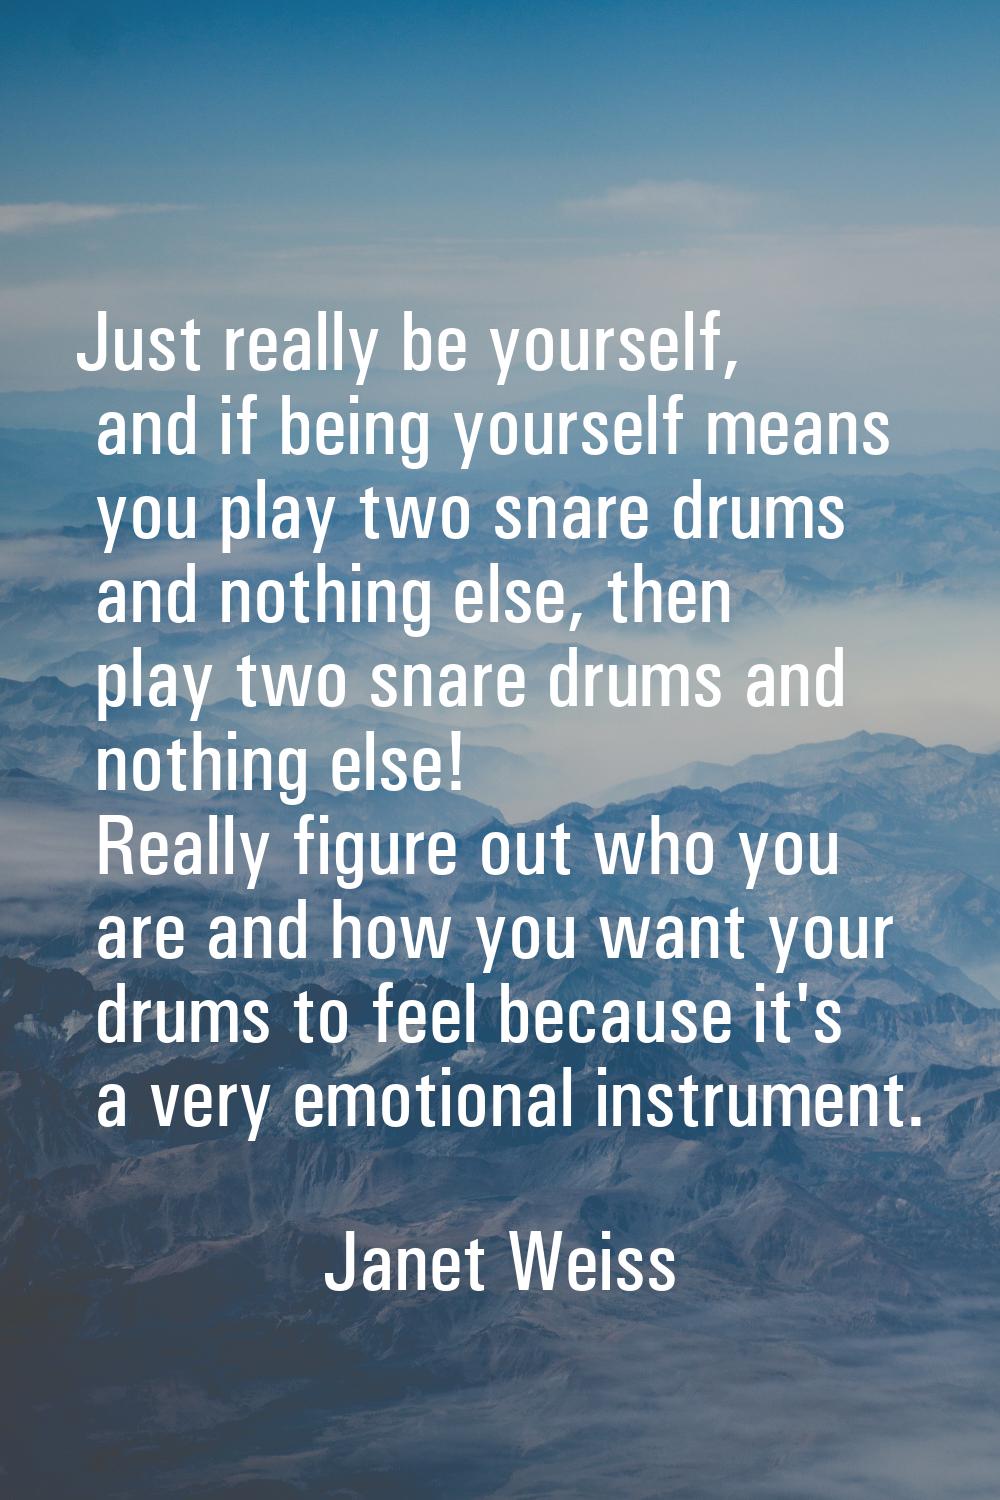 Just really be yourself, and if being yourself means you play two snare drums and nothing else, the